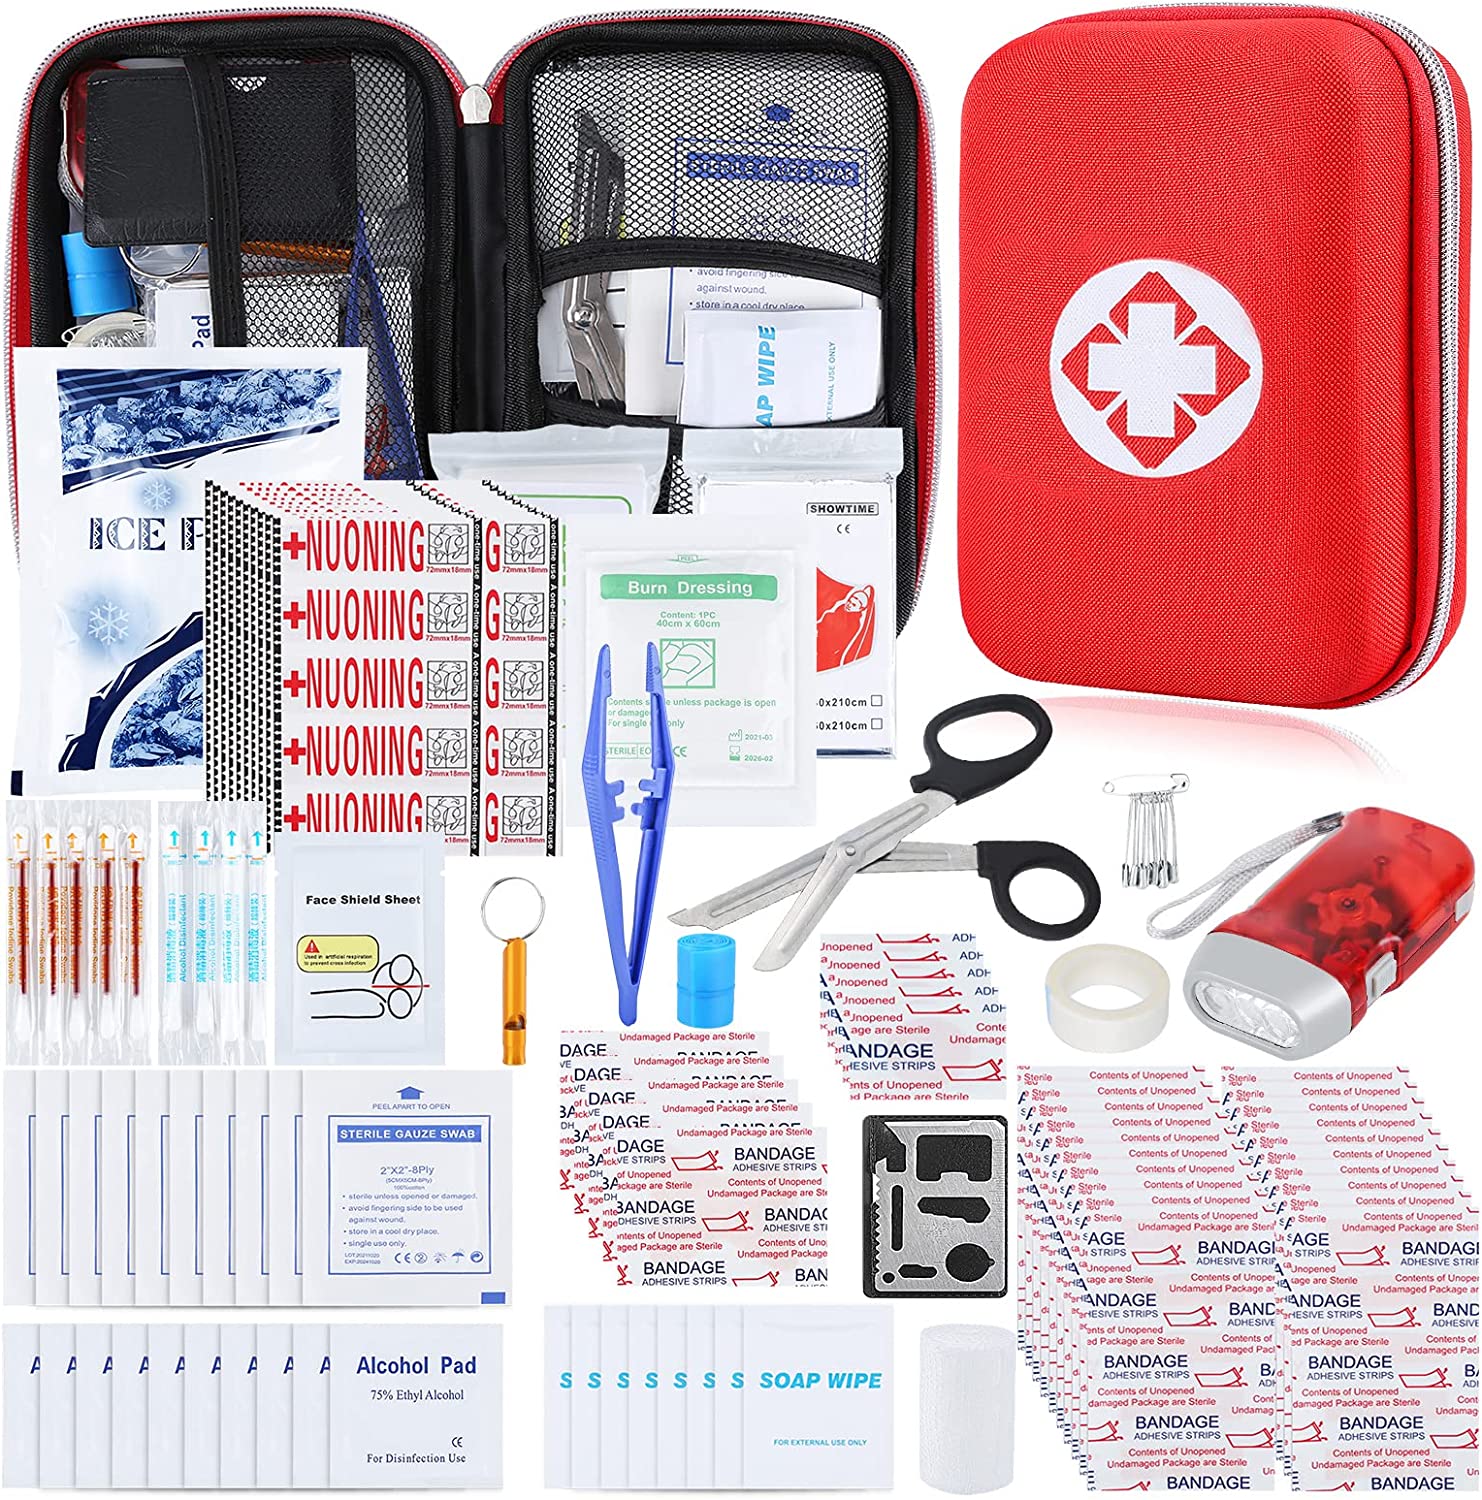 YIDERBO First Aid Kit Survival Kit, 274Pcs Upgraded Outdoor Emergency Survival Kit Gear – Medical Supplies Trauma Bag Safety First Aid Kit for Home Office Car Boat Camping Hiking Hunting Adventures